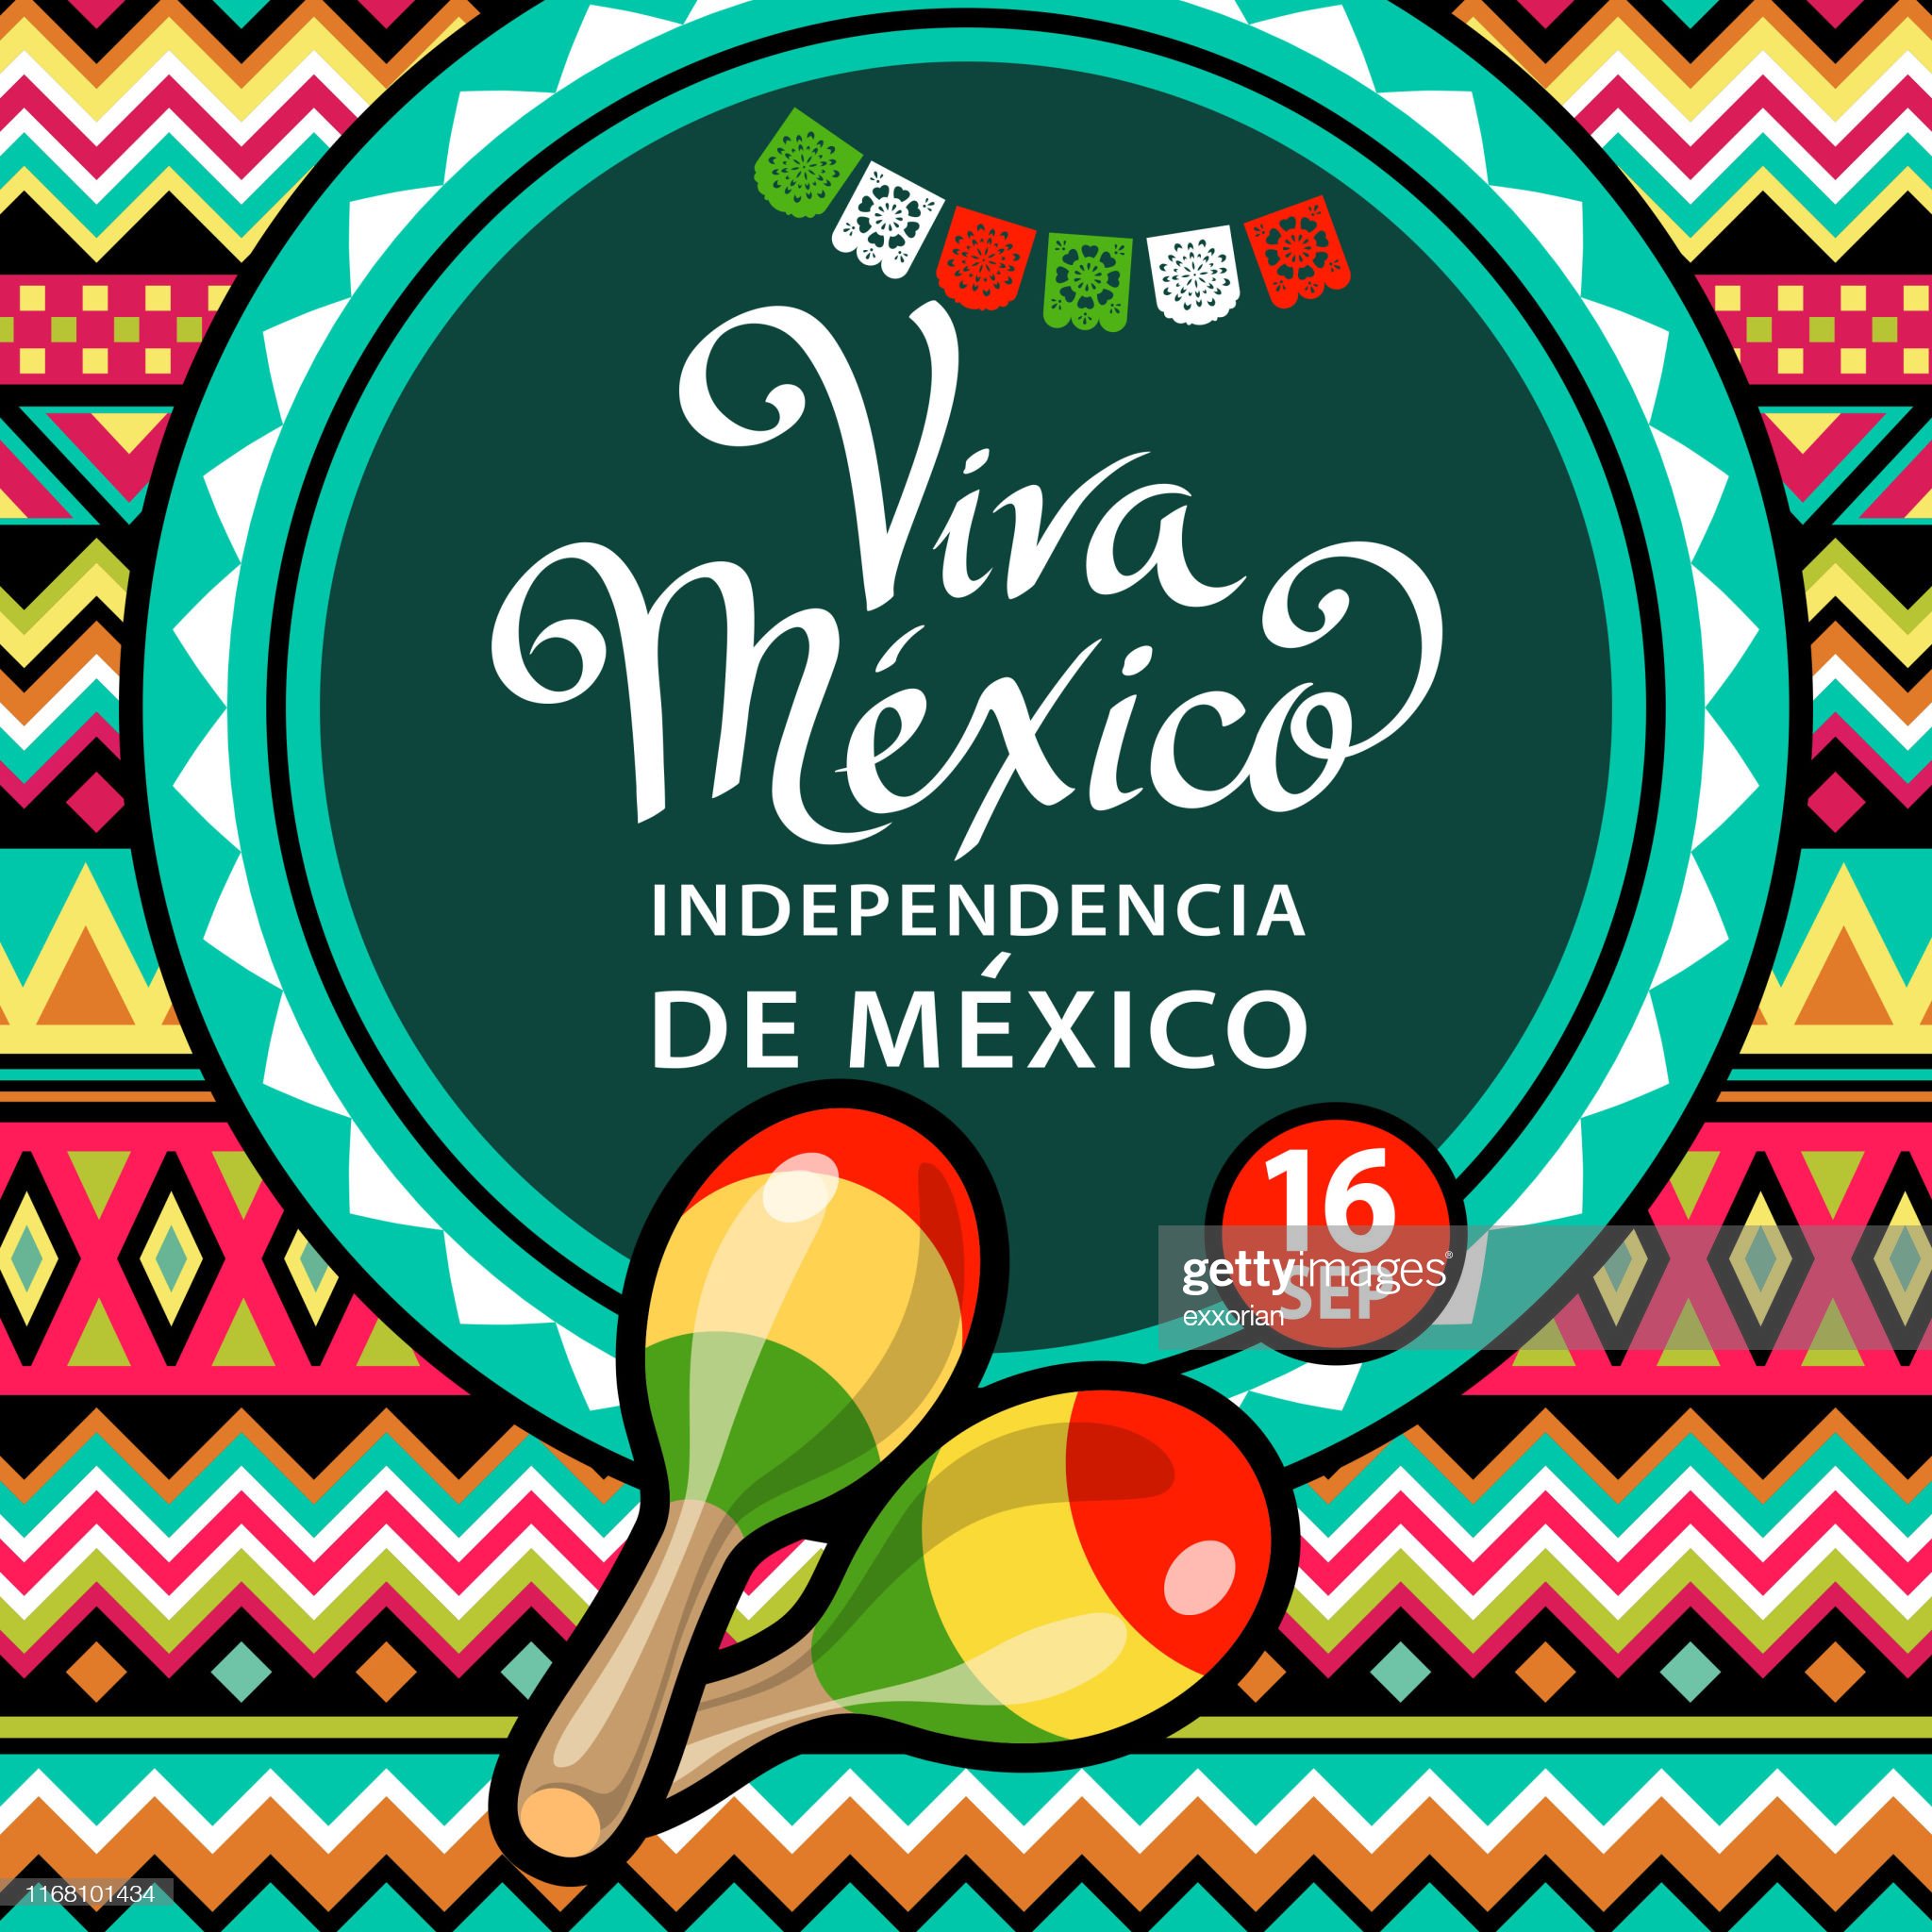 Viva Mexico Independence Celebration High Res Vector Graphic